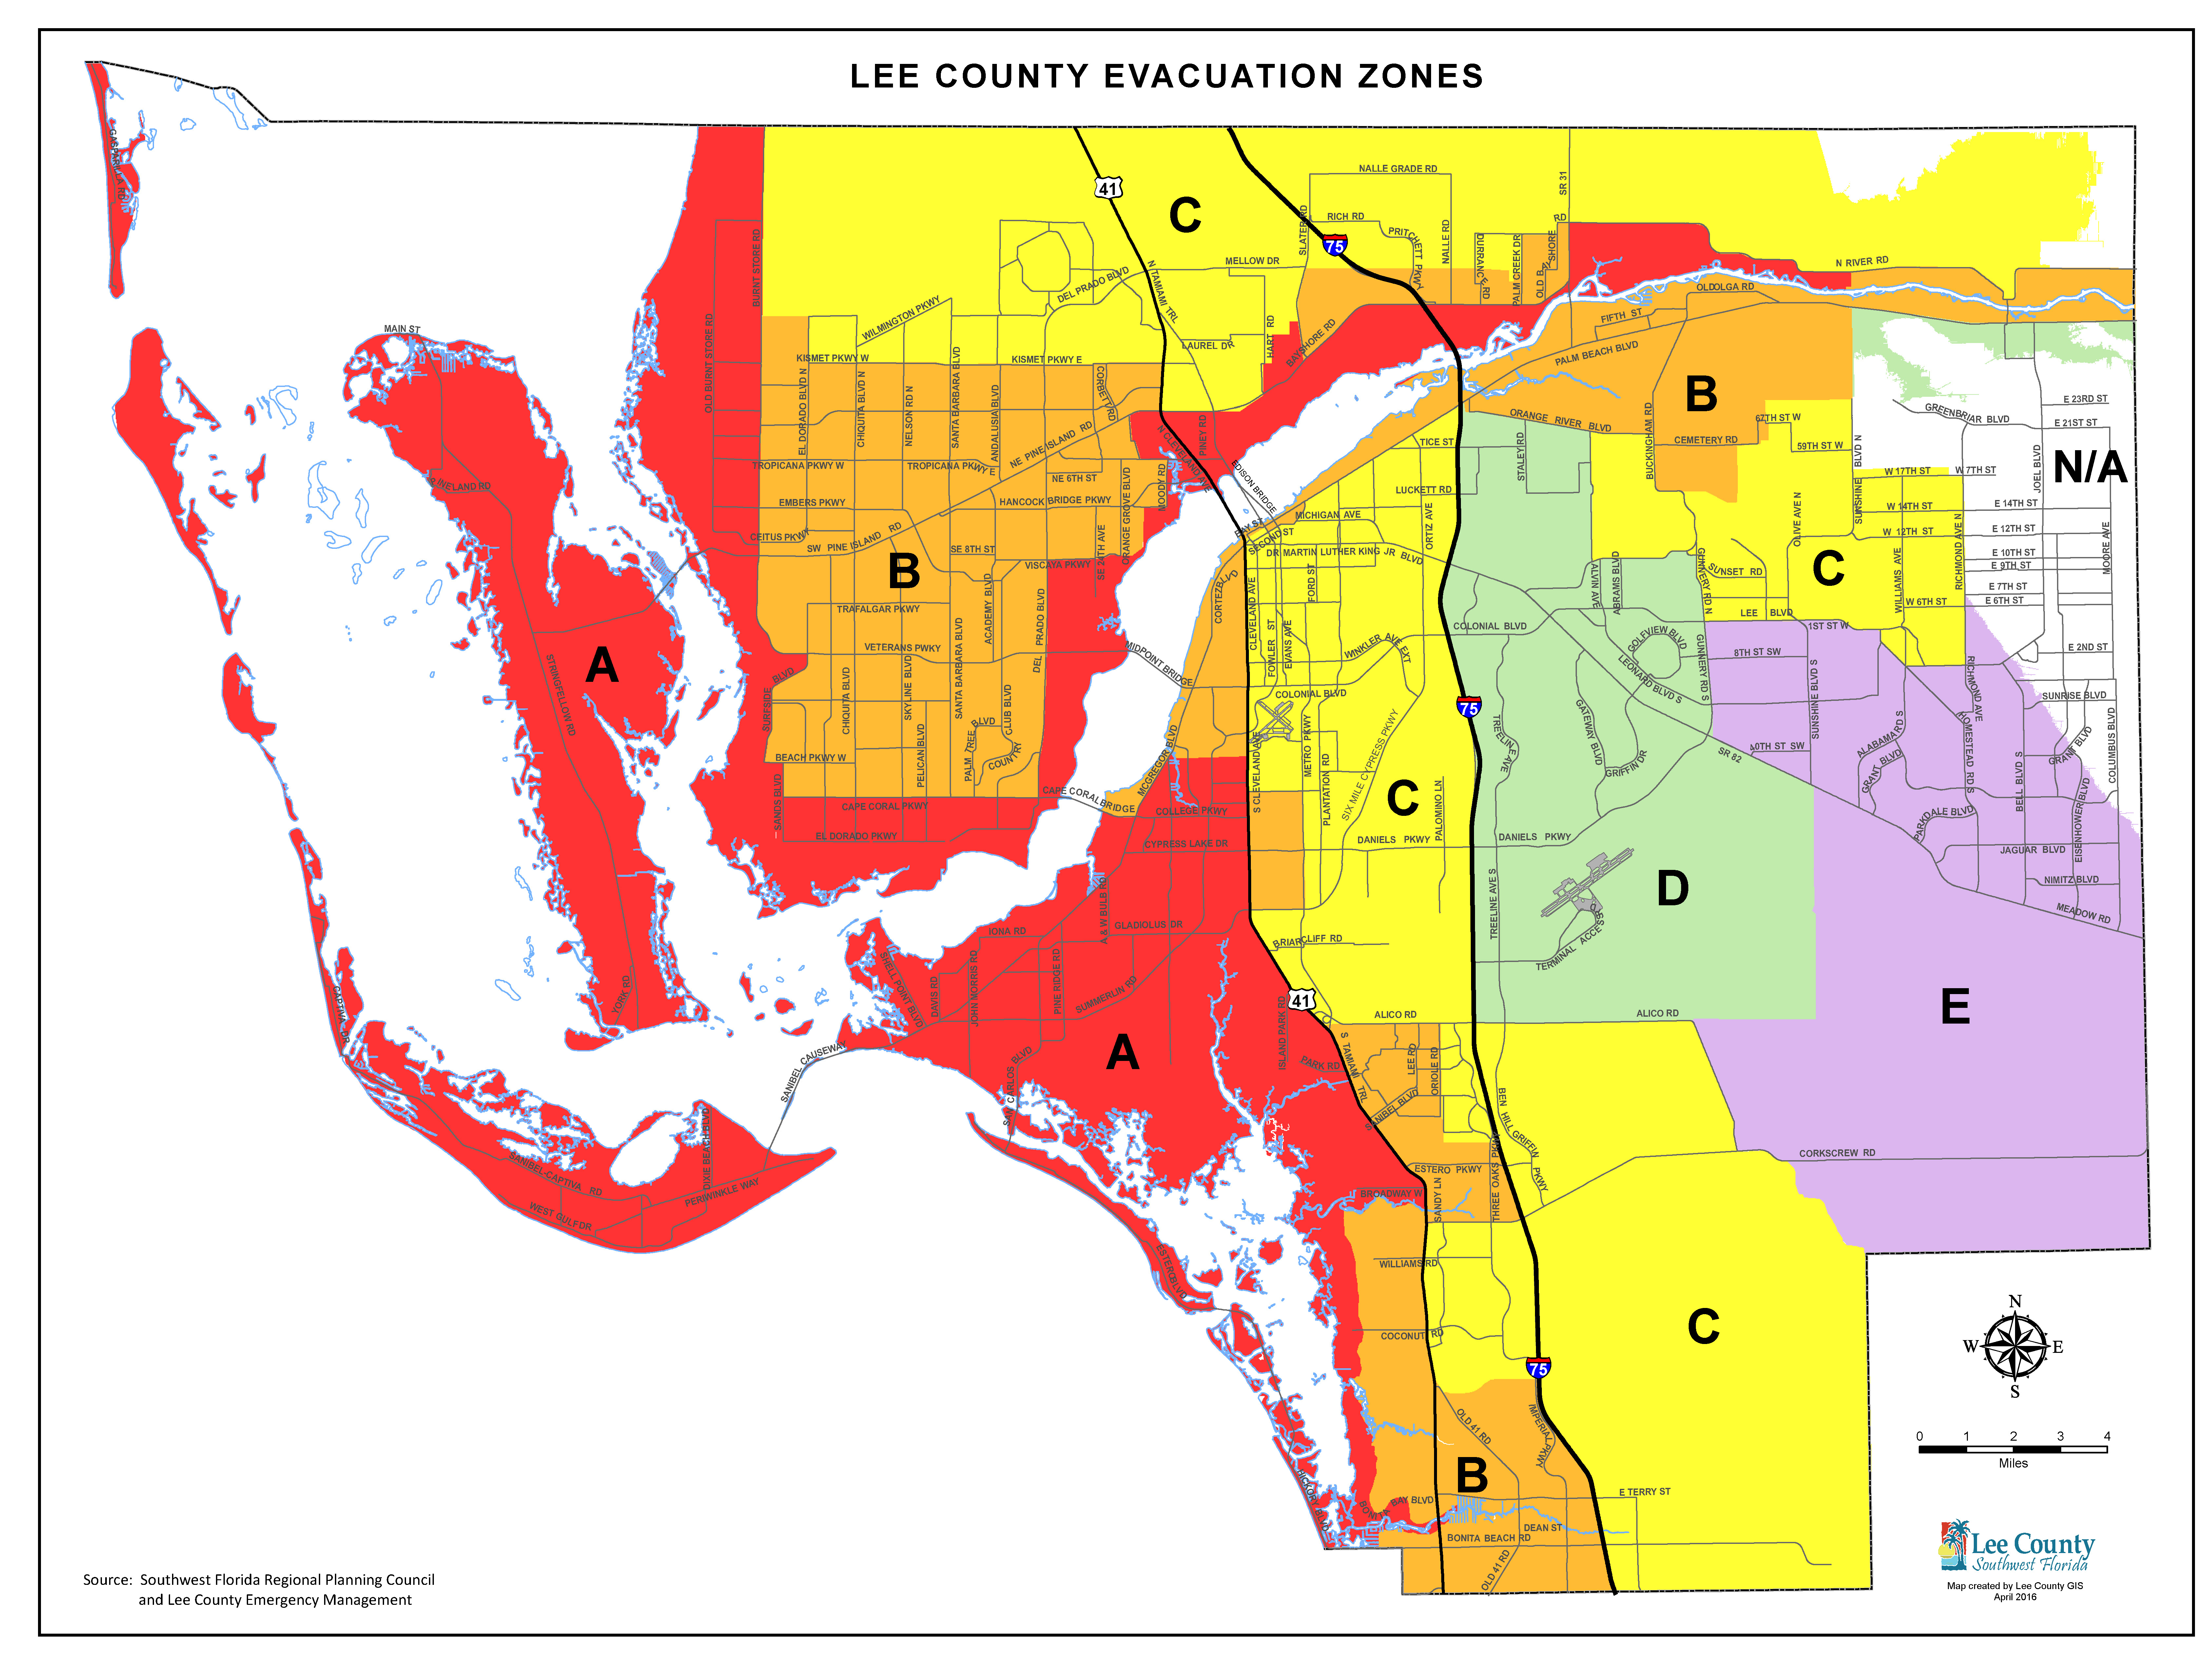 Untitled Lee County evacuation zones Lee County Flood Insurance Rate Map (F...